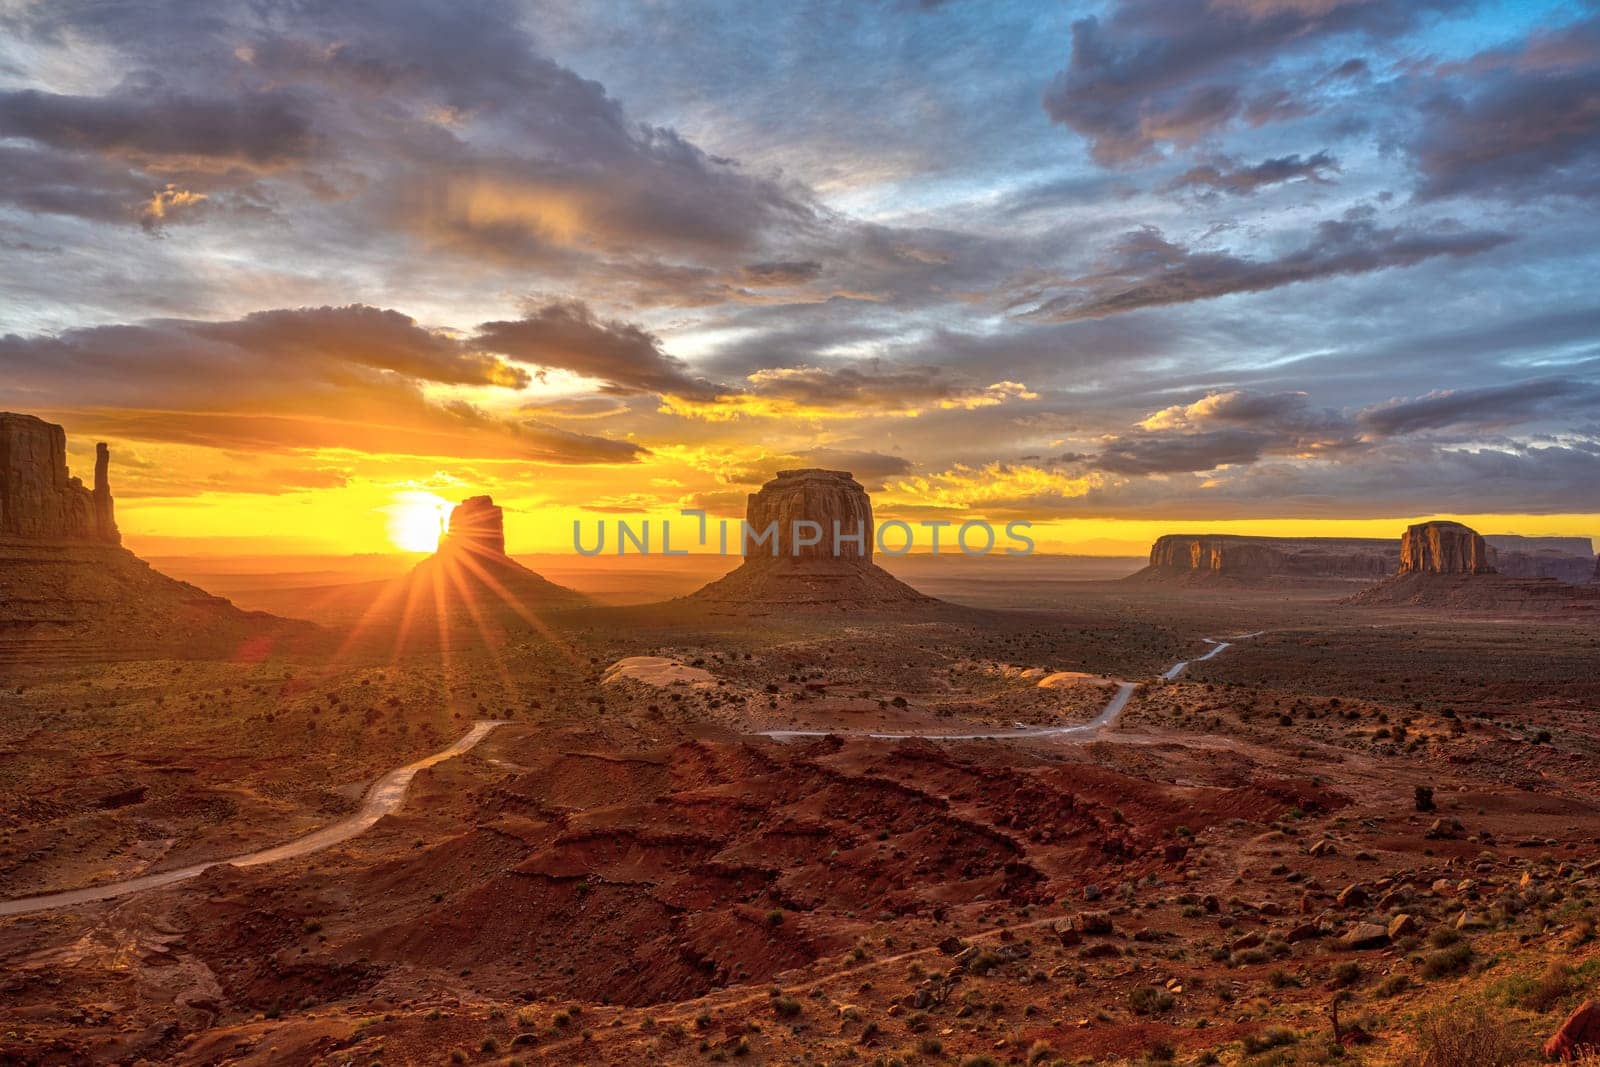 Amazing sunrise in the famous Monument Valley in Arizona, USA